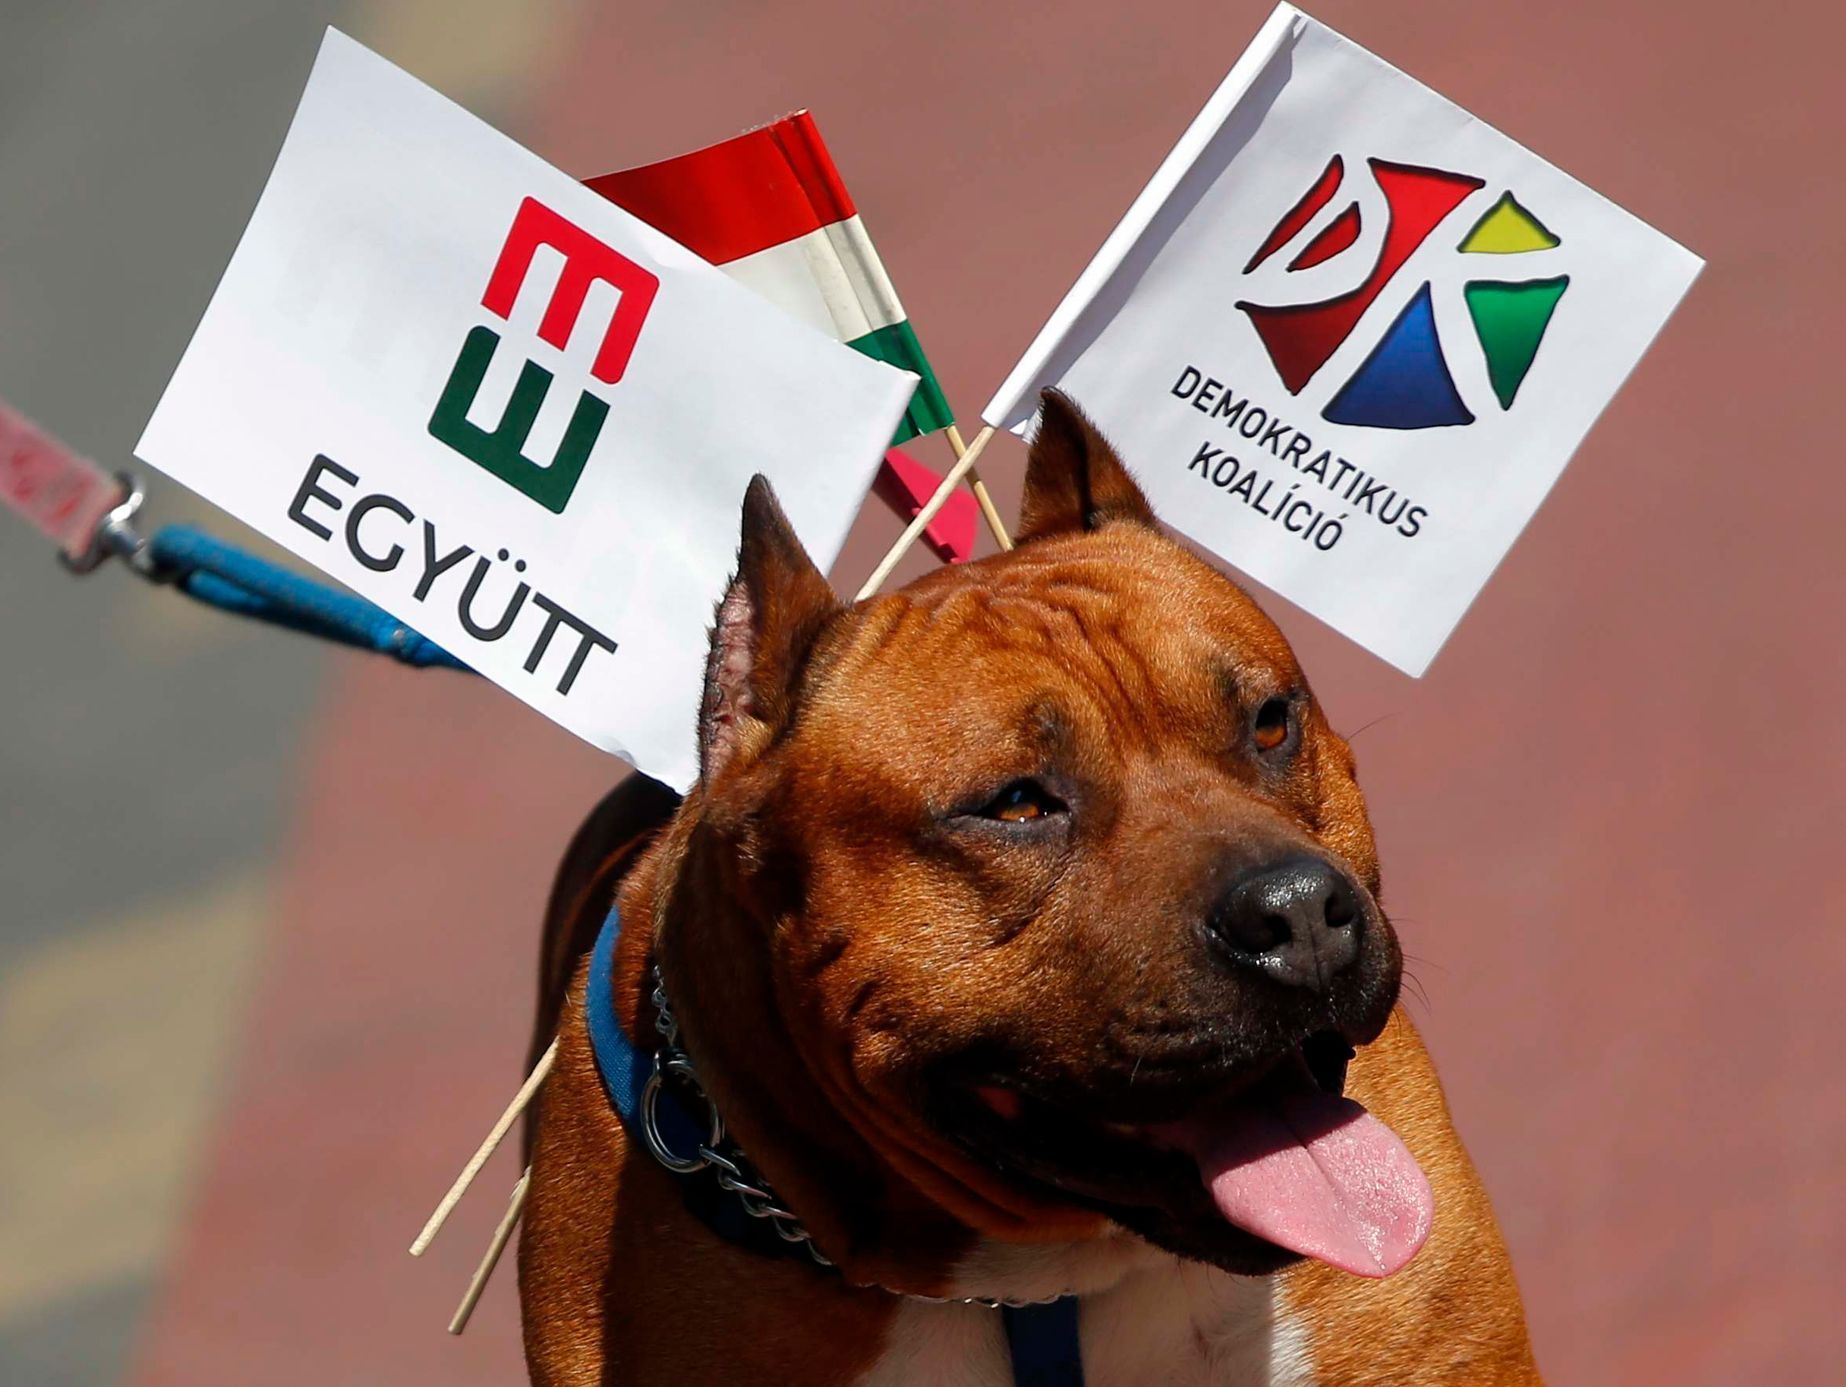 A dog carries flags of parties in Hungary's leftist opposition alliance, during an election rally in Budapest